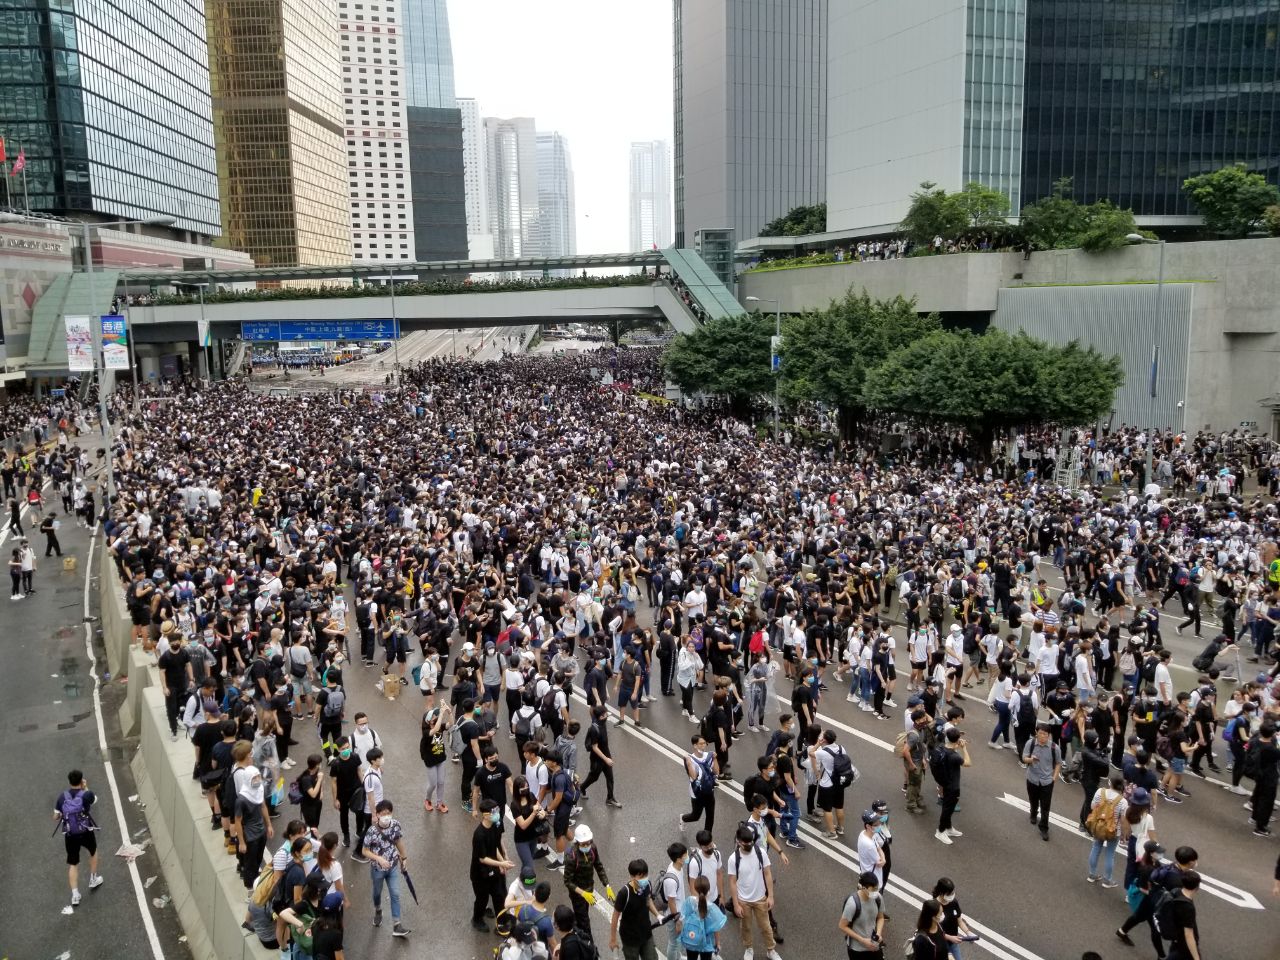 Protesters remove police barricades and move to block streets surrounding Hong Kong’s Legislative Council building in defiance of a controversial bill that would open the door for extradition to mainland China. Coconuts Hong Kong/Vicky Wong